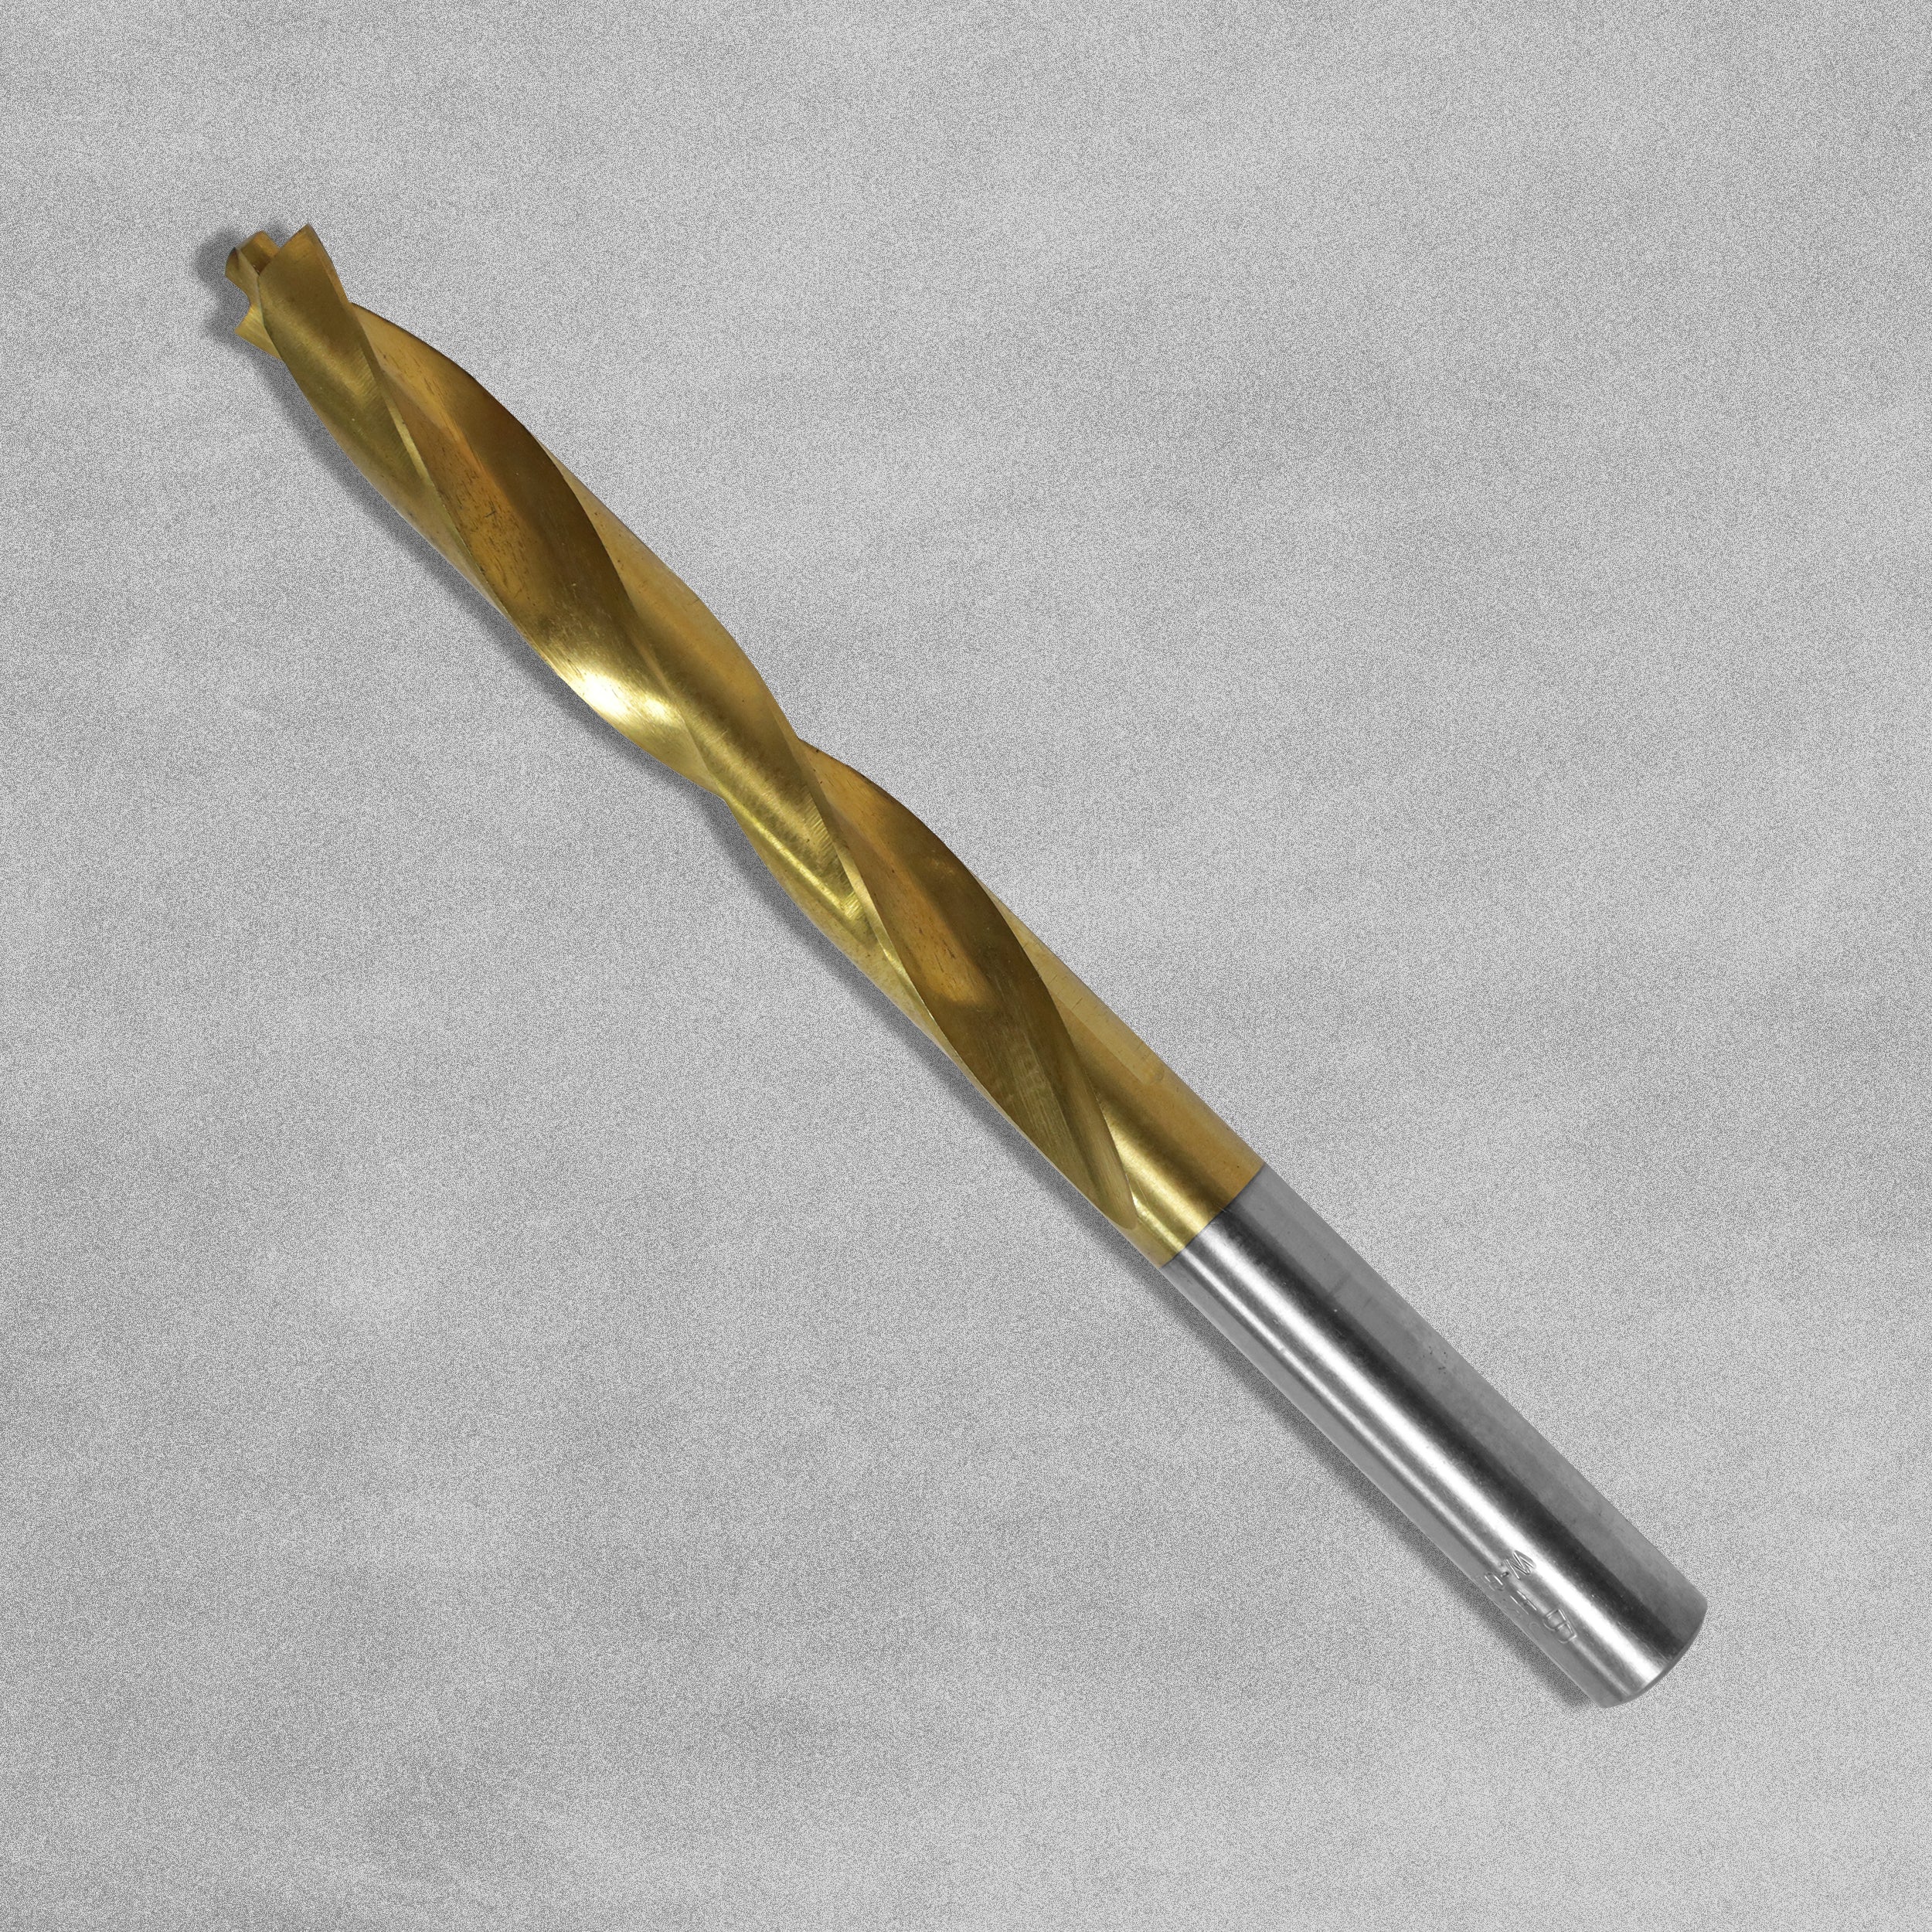 HSS-TiN Pilot Point Metal Drill Bit 11mm by BBW Germany, sold by In-Excess